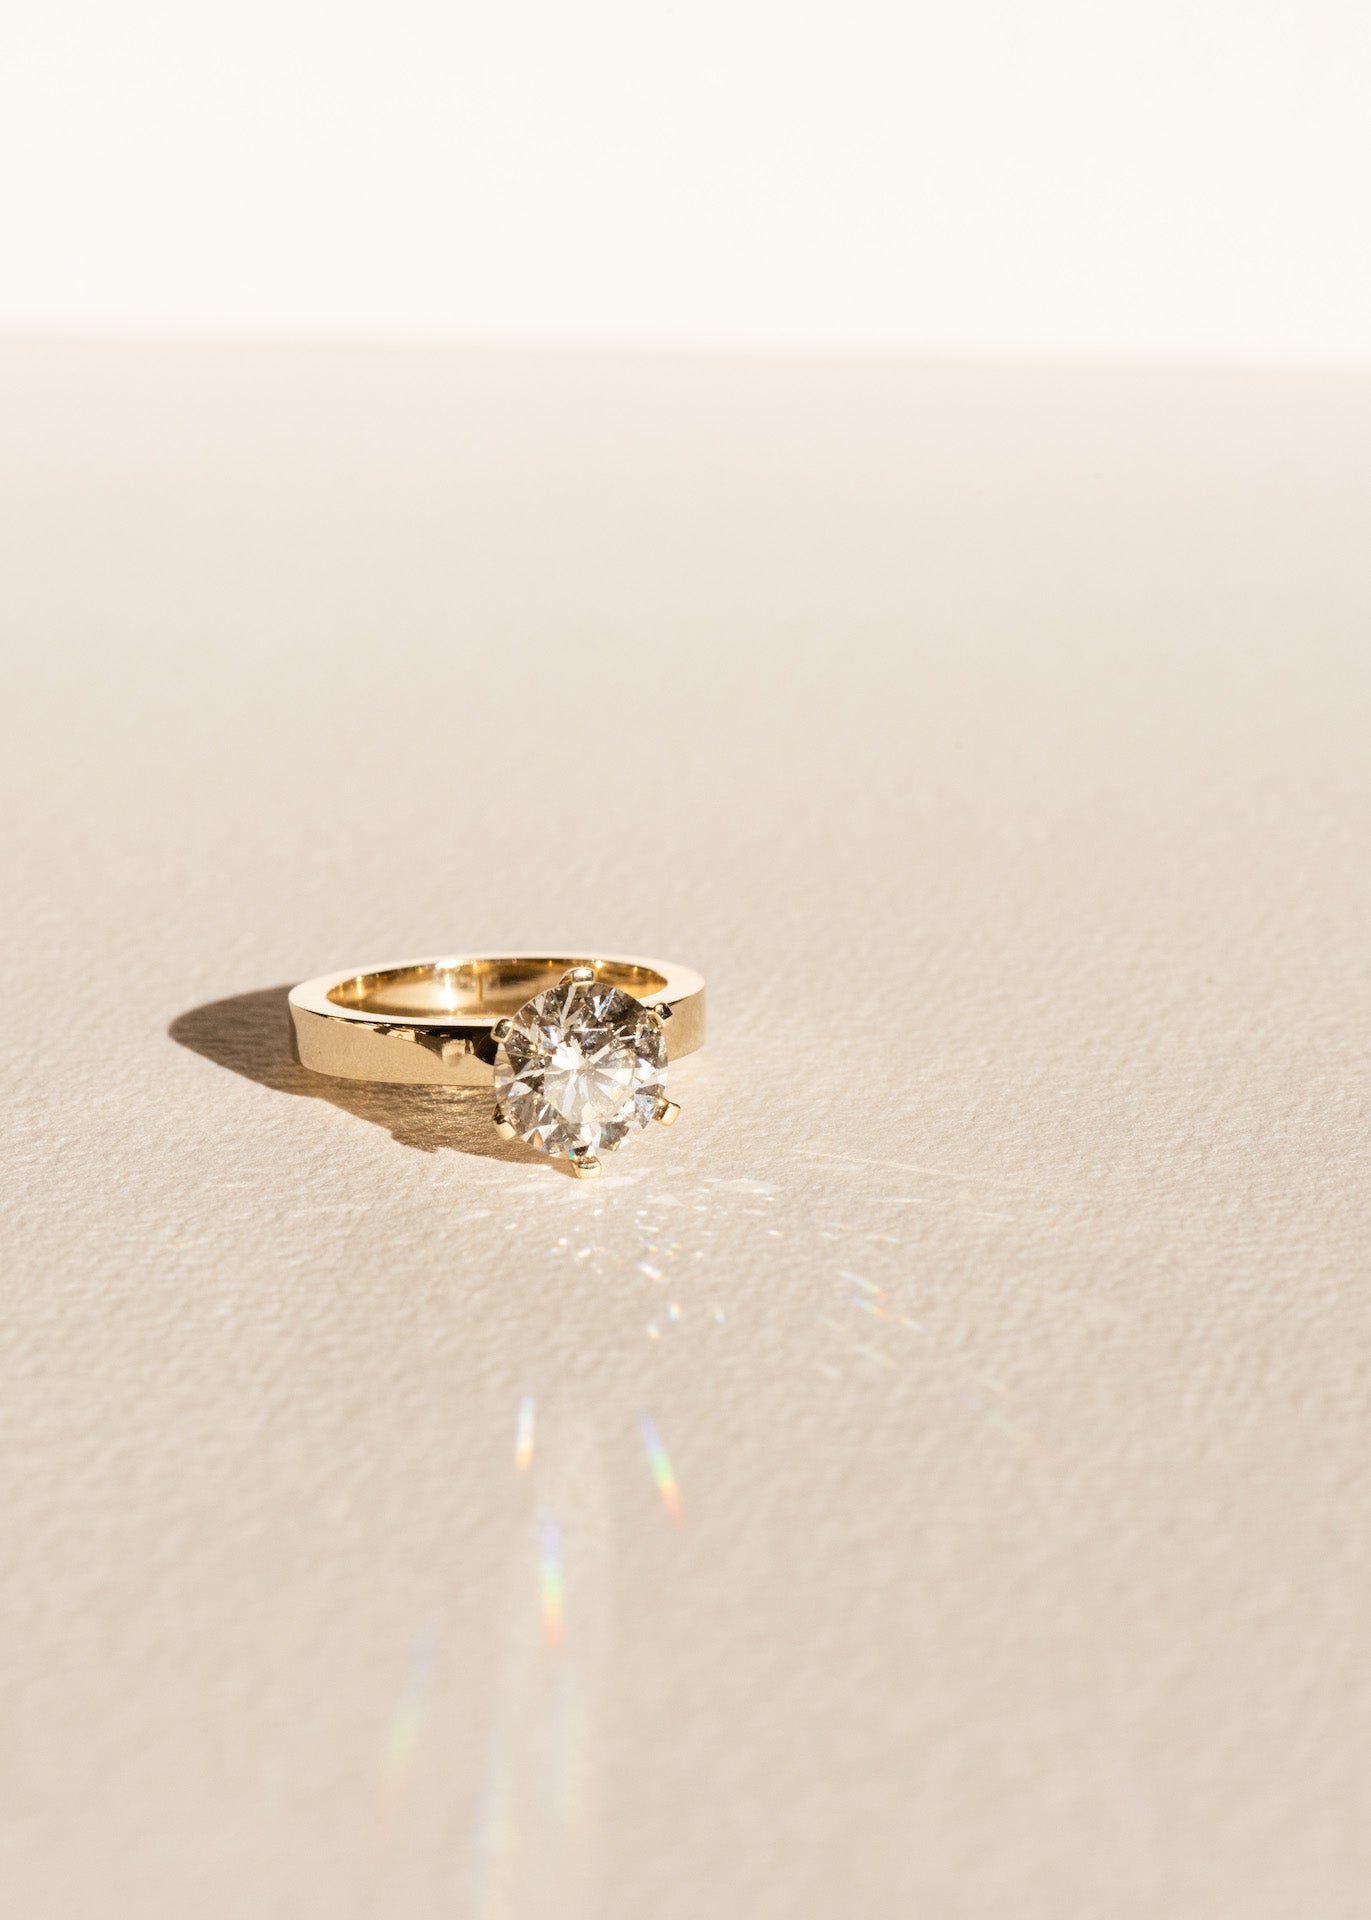 Solitaire Engagement Ring - Bespoke Design - Dean & Dust - Four Claw - Round Diamond